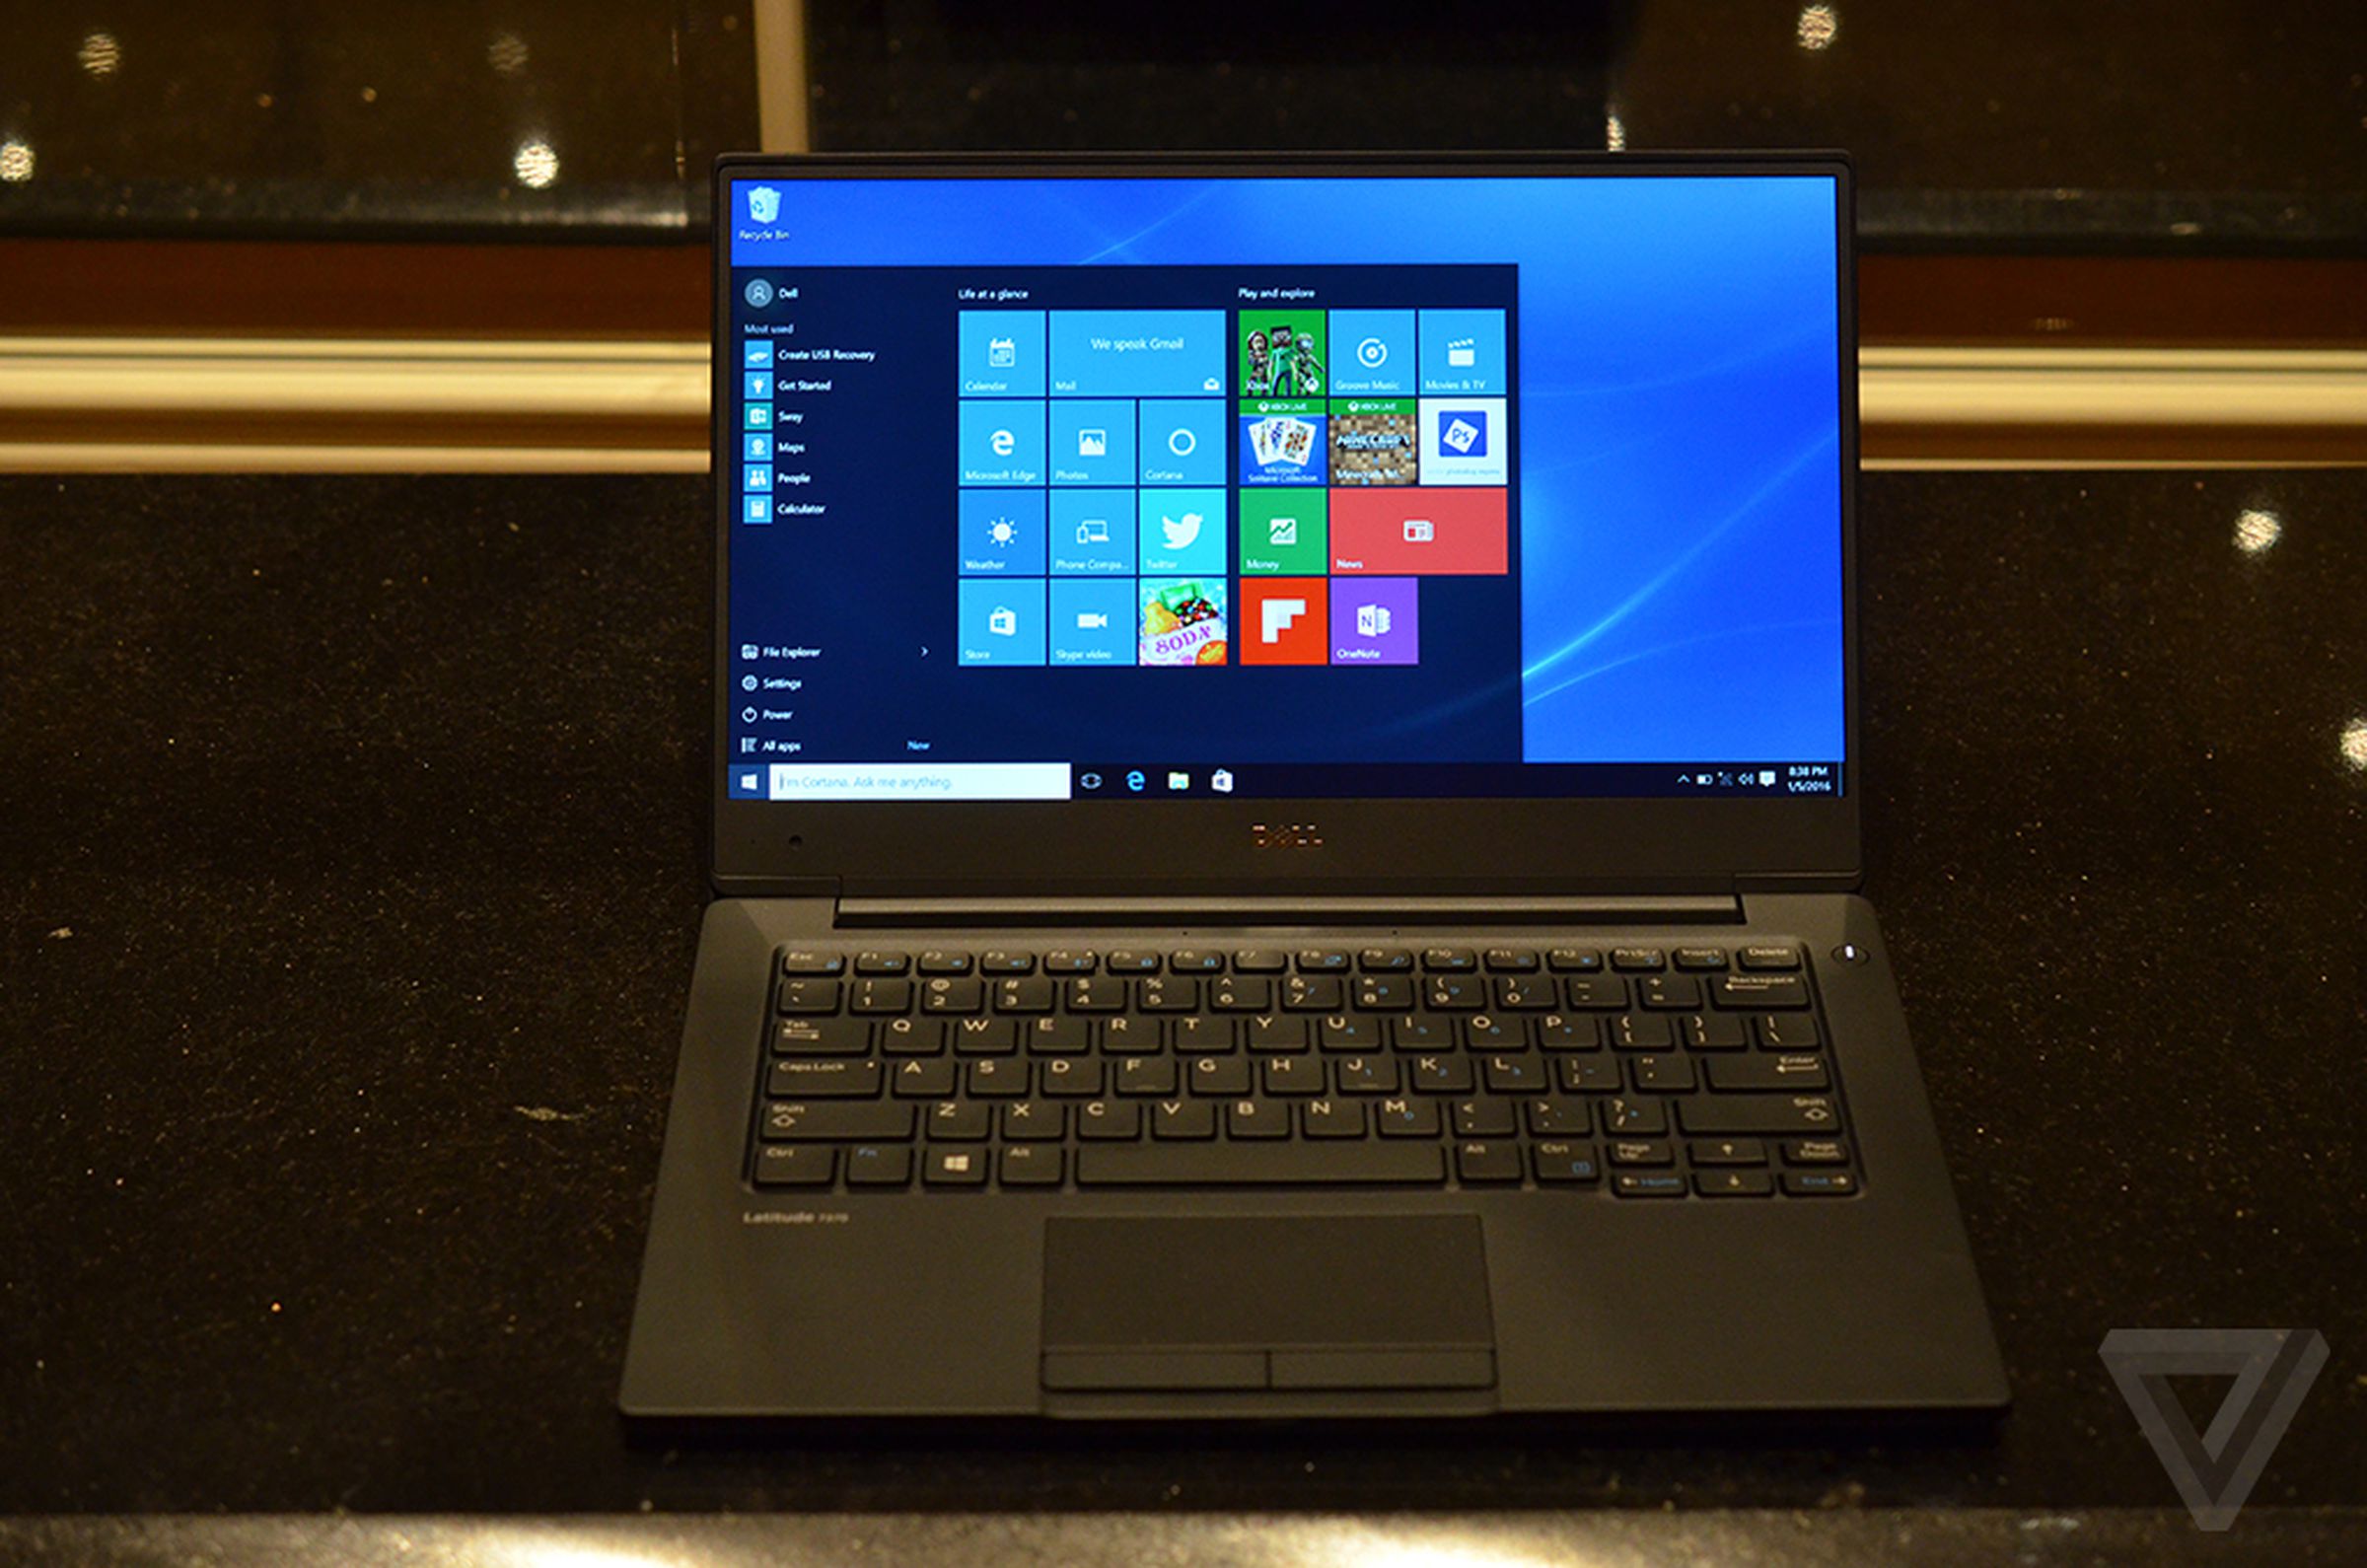 Dell Latitude 13 (2016) hands-on photos